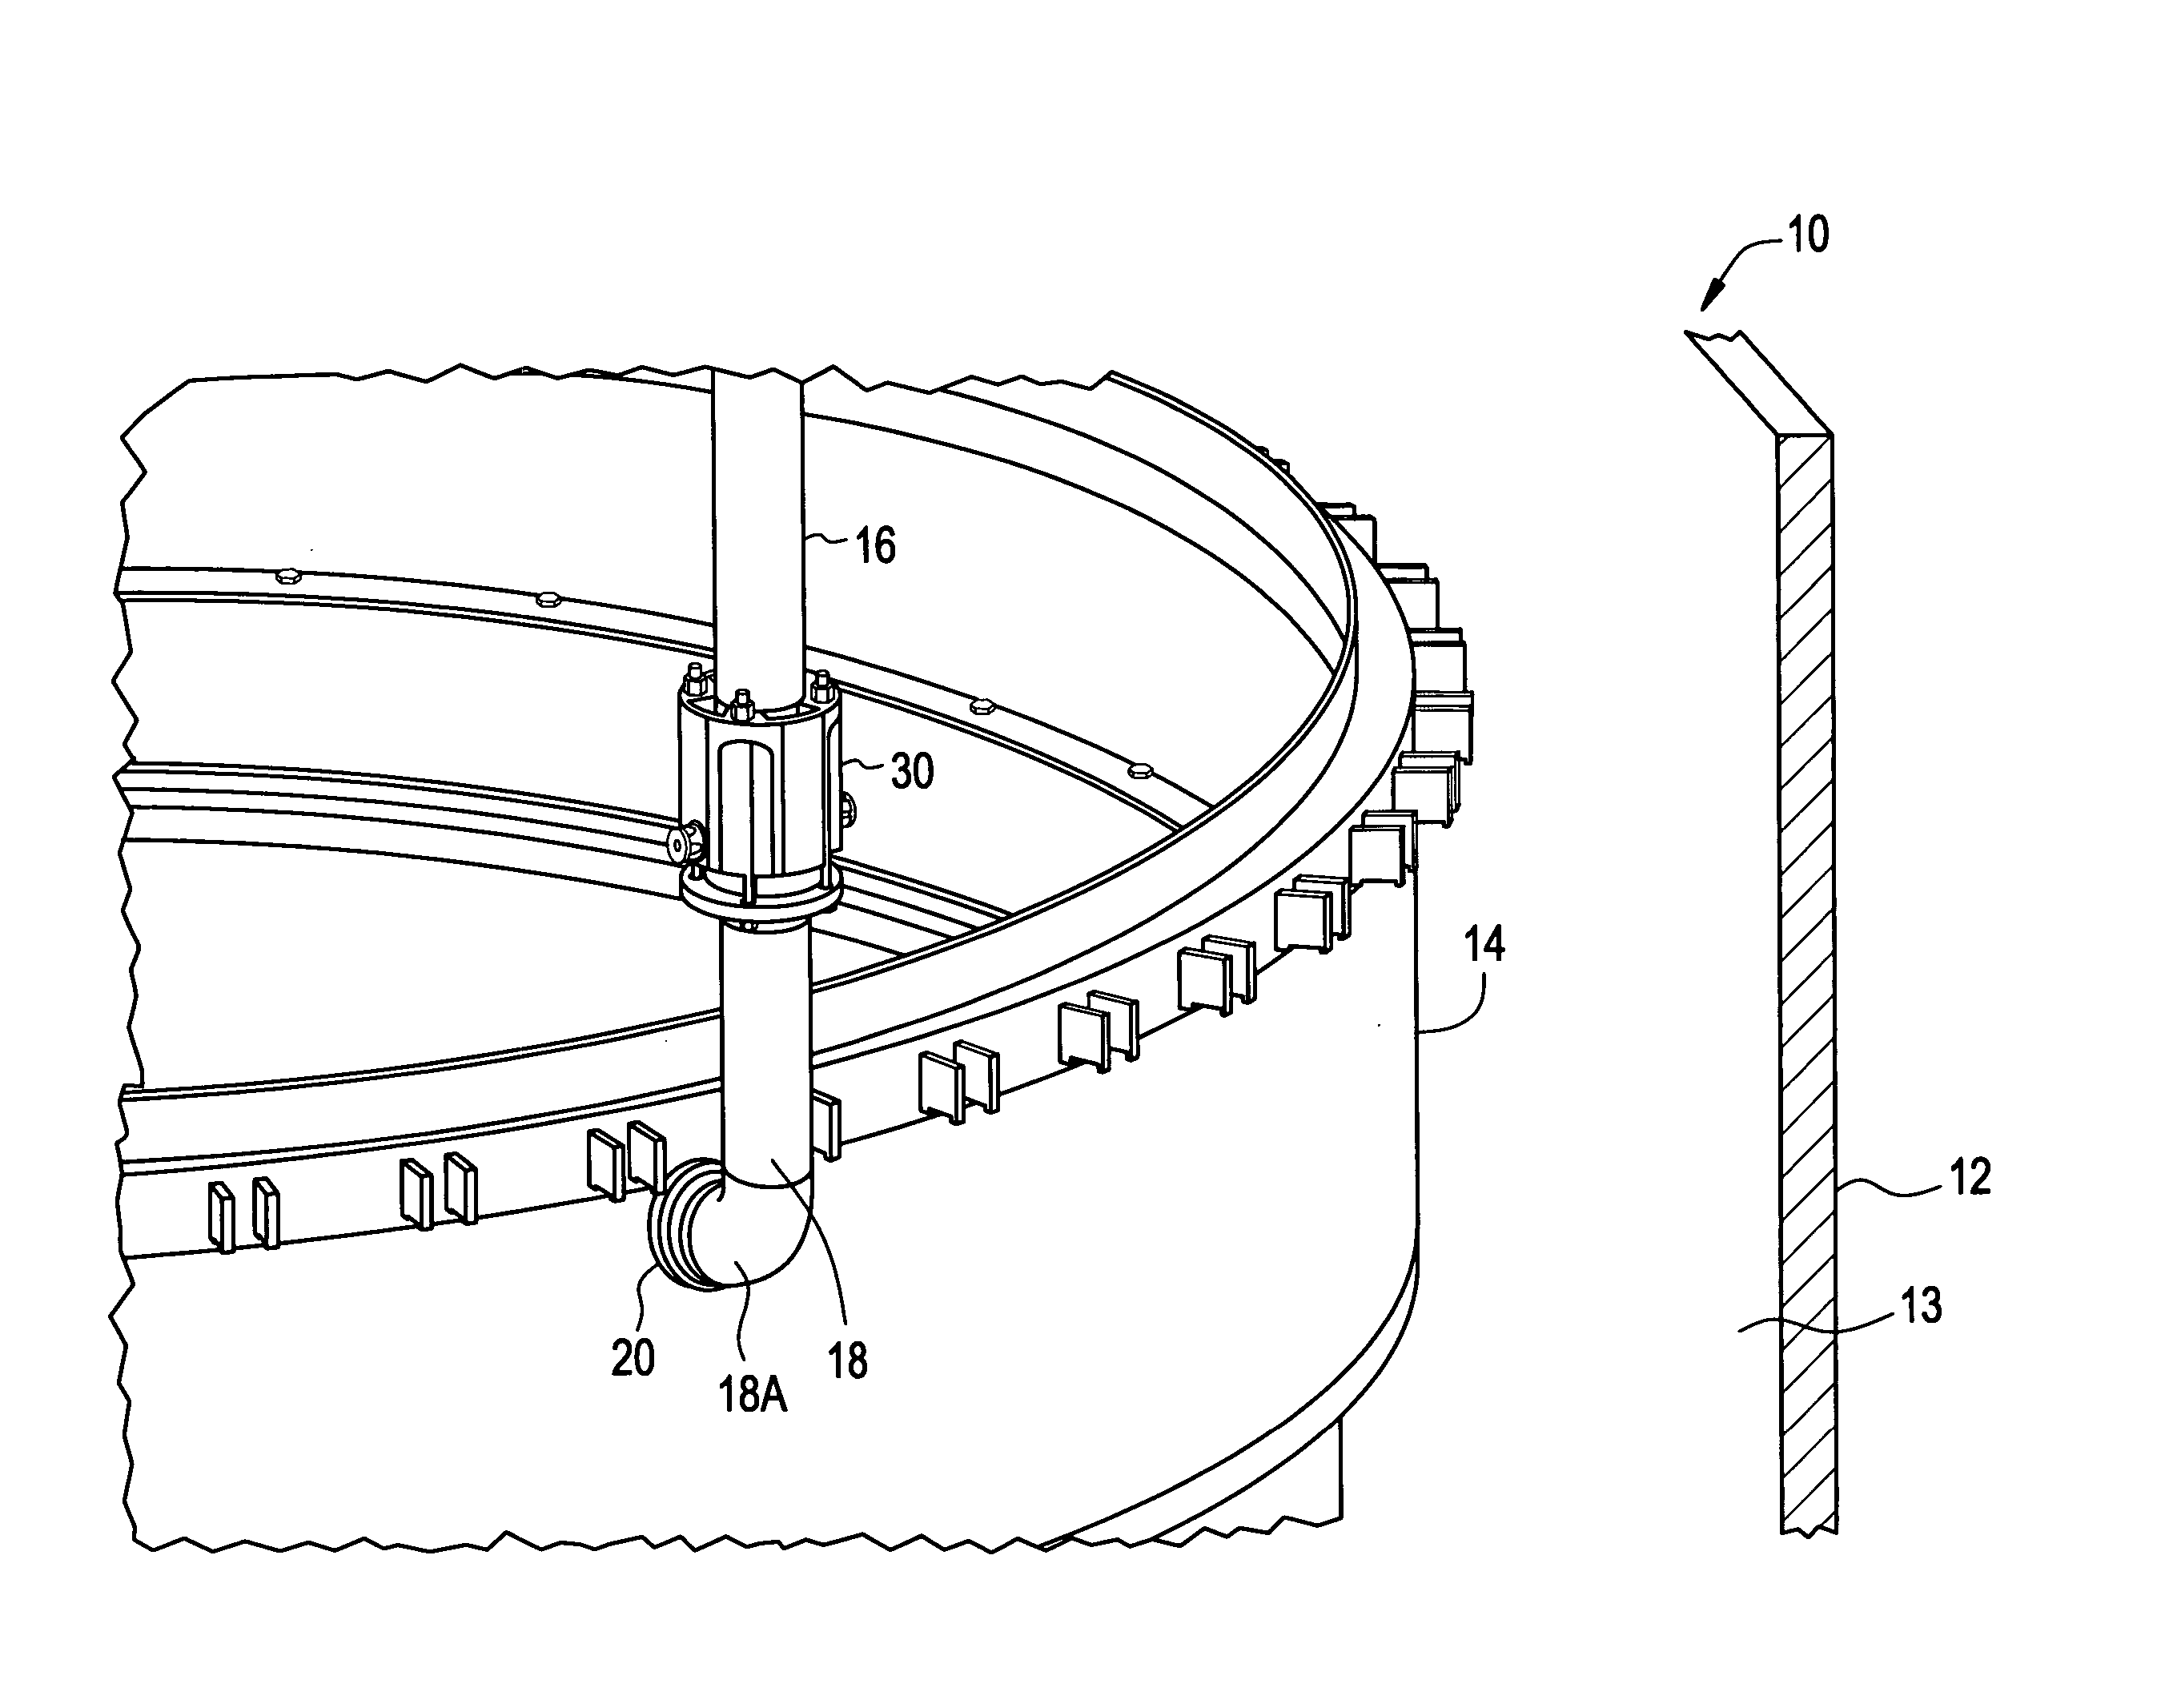 Core spray sparger T-box clamp apparatus and method for installing the same